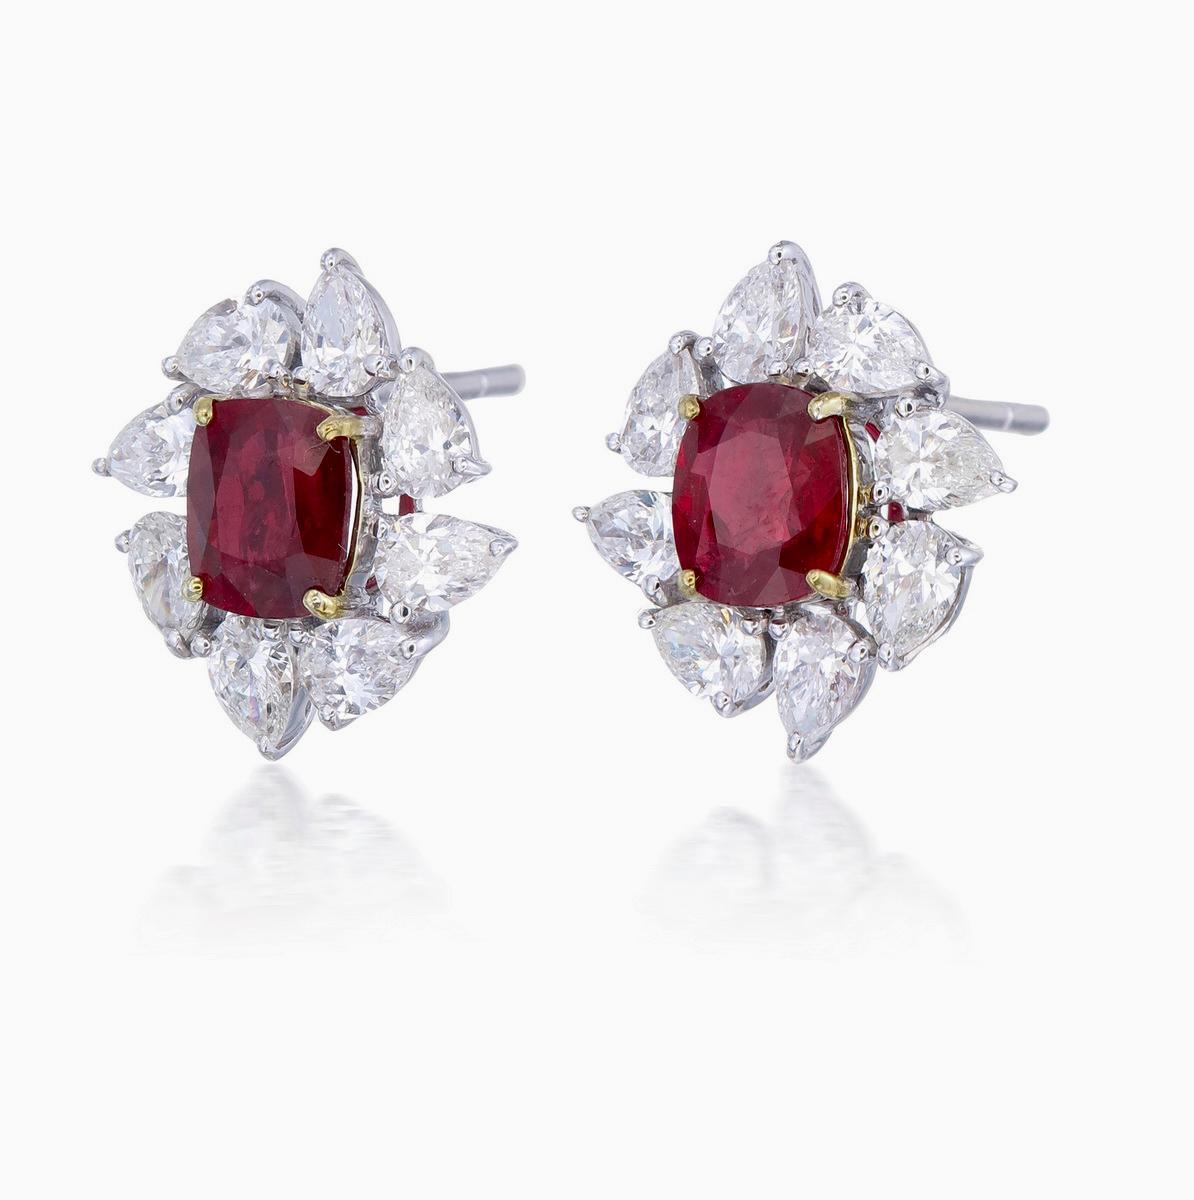 A pair of fine timeless ruby and diamond earrings made in 18 Karat gold. This pair of earrings embraces minimalism with its simple design while still displaying elegance; a great fit for lifestyle wear.

- There are two center oval Pigeon Blood